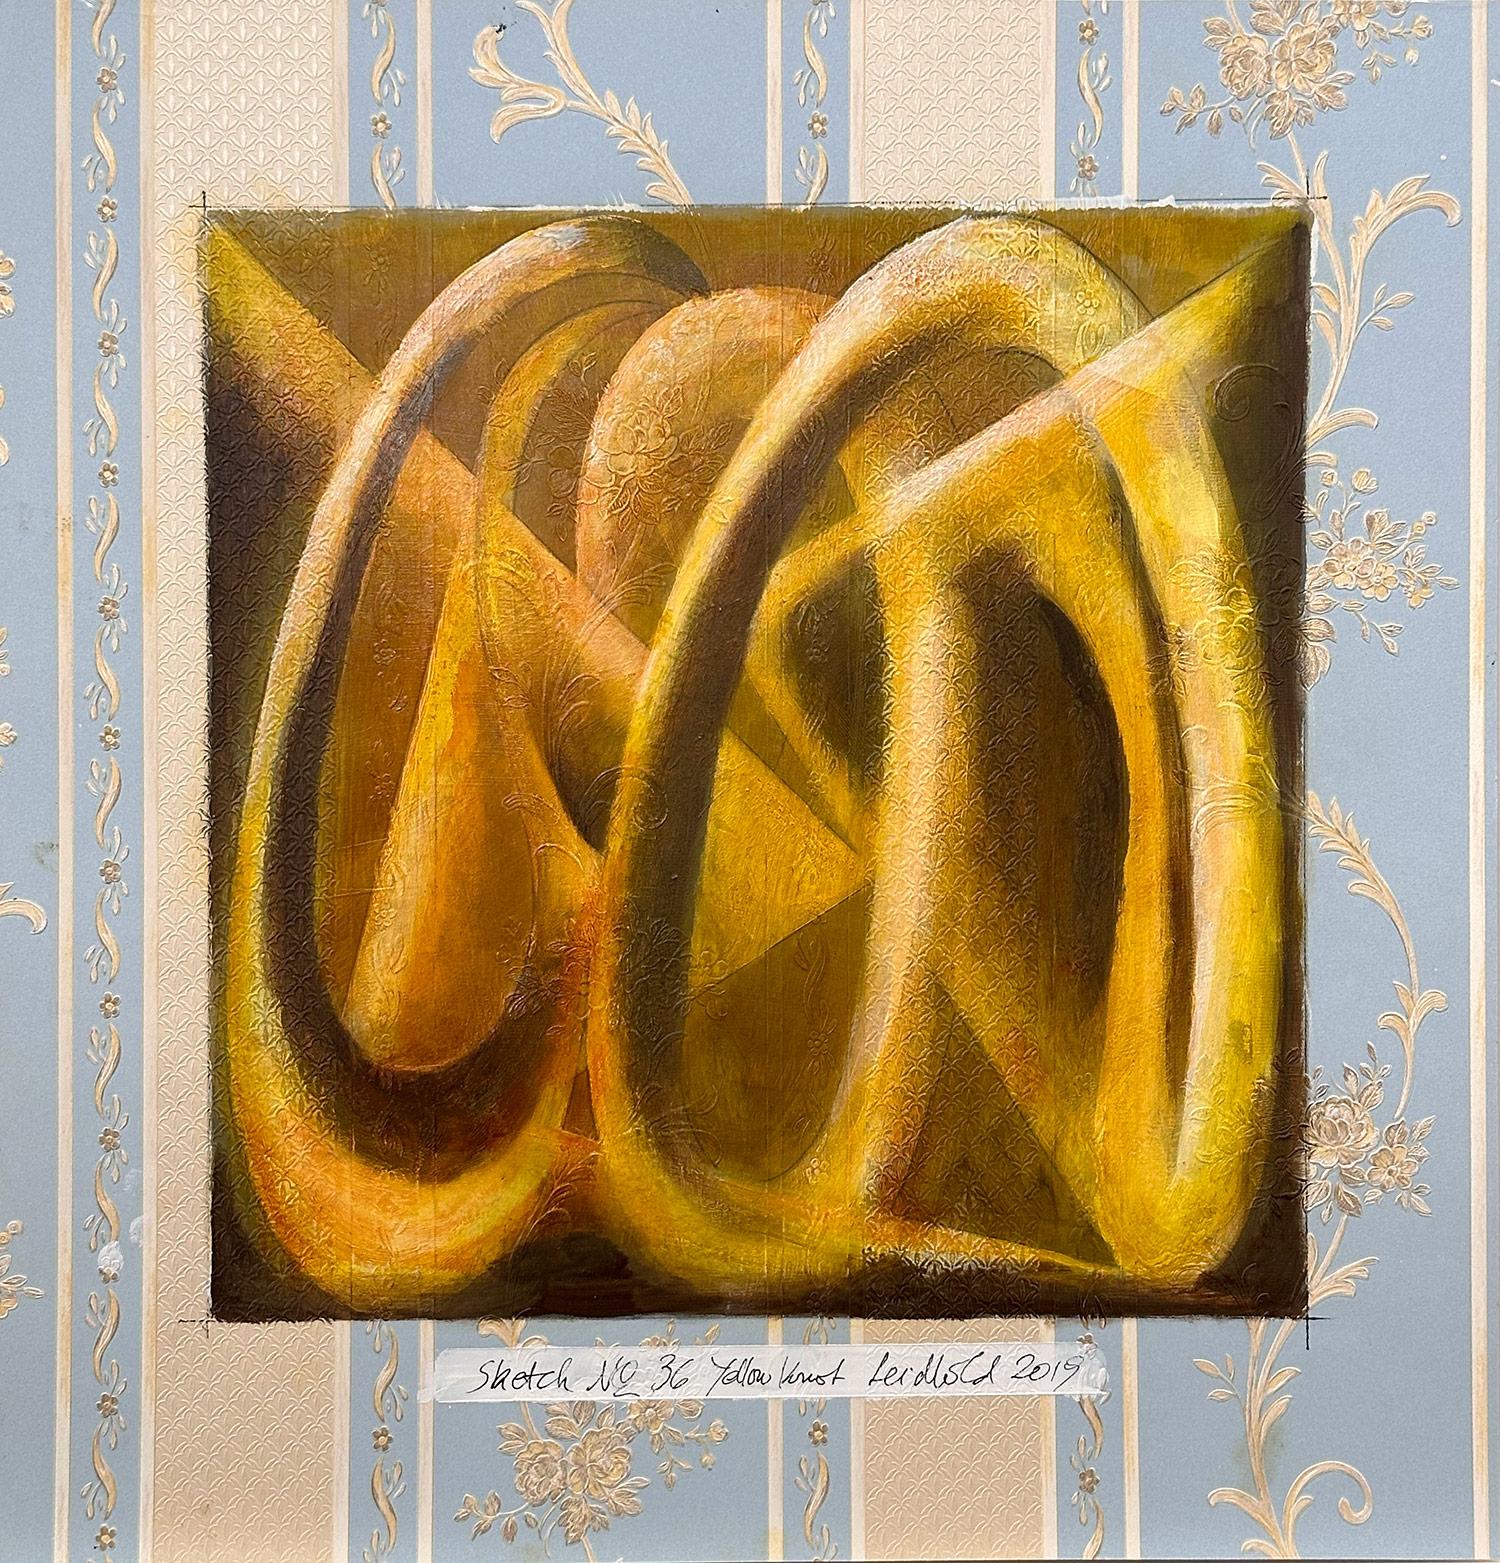 Wolfgang Leidhold Abstract Painting - "Sketch No.36 Yellow Knot" Abstract Representational Painting Work on Wallpaper